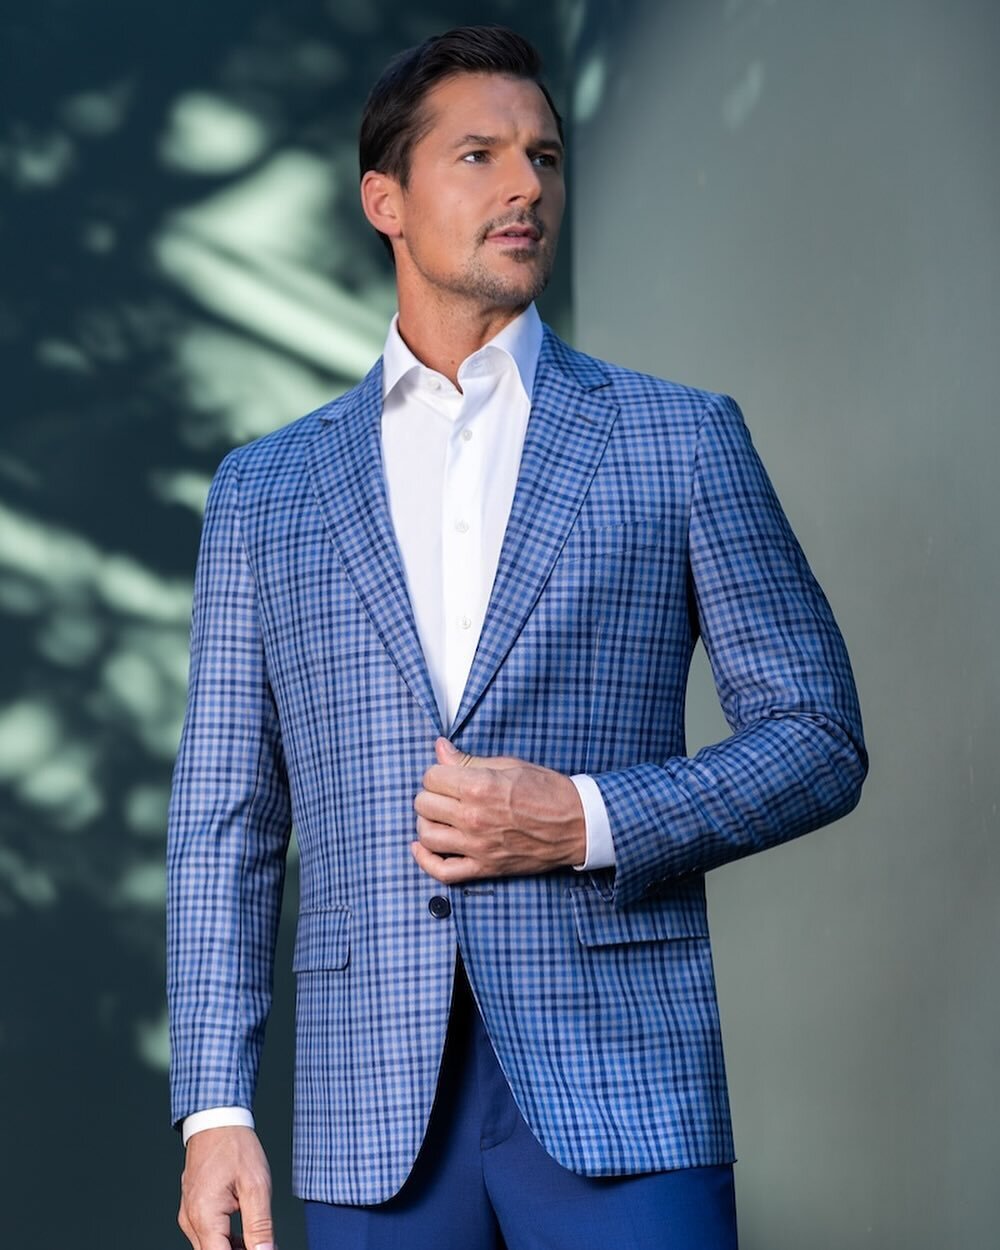 Introducing our latest showstopper - our Light Blue Check Tailored Coat. Impeccably crafted from the finest Italian fabric, this coat is the epitome of sophistication and style. The subtle yet striking check pattern is bound to turn heads wherever yo